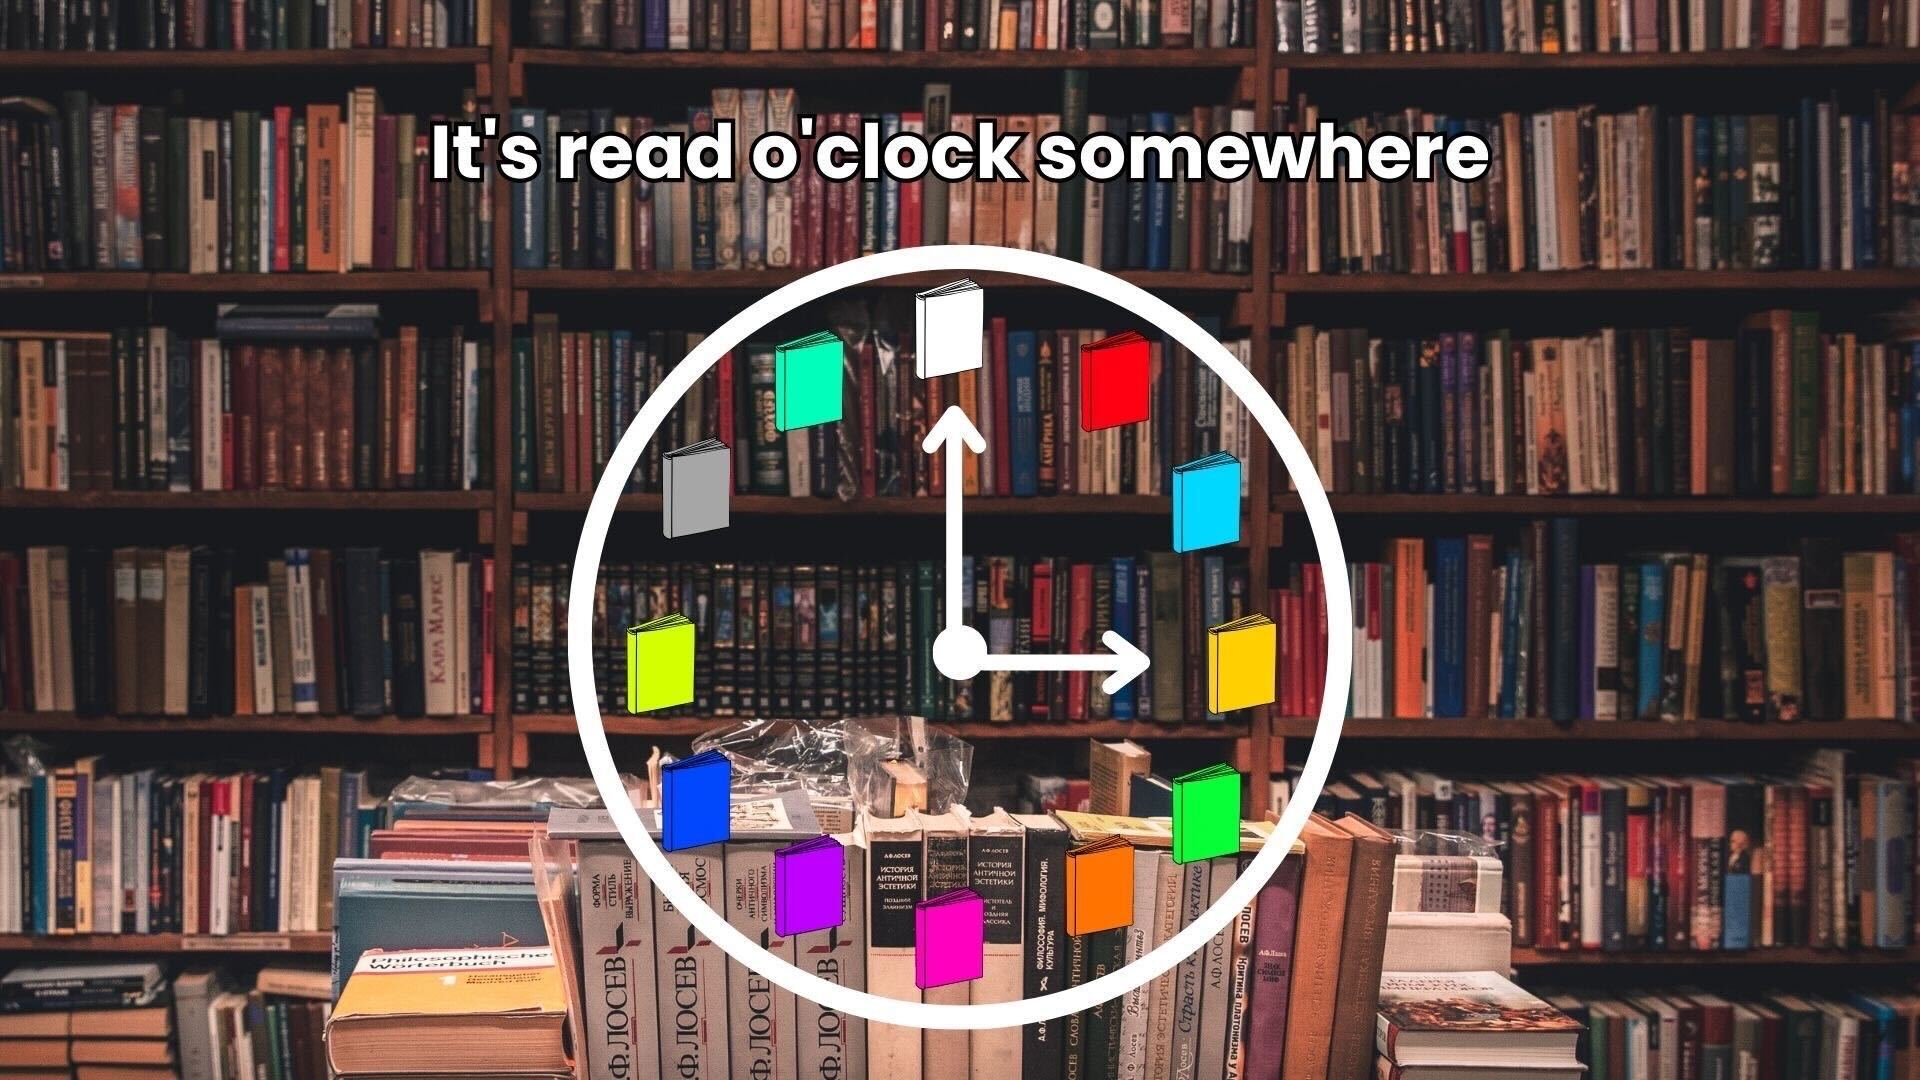 Clock with colored books instead of numbers and a bookshelf covered in books for the background.